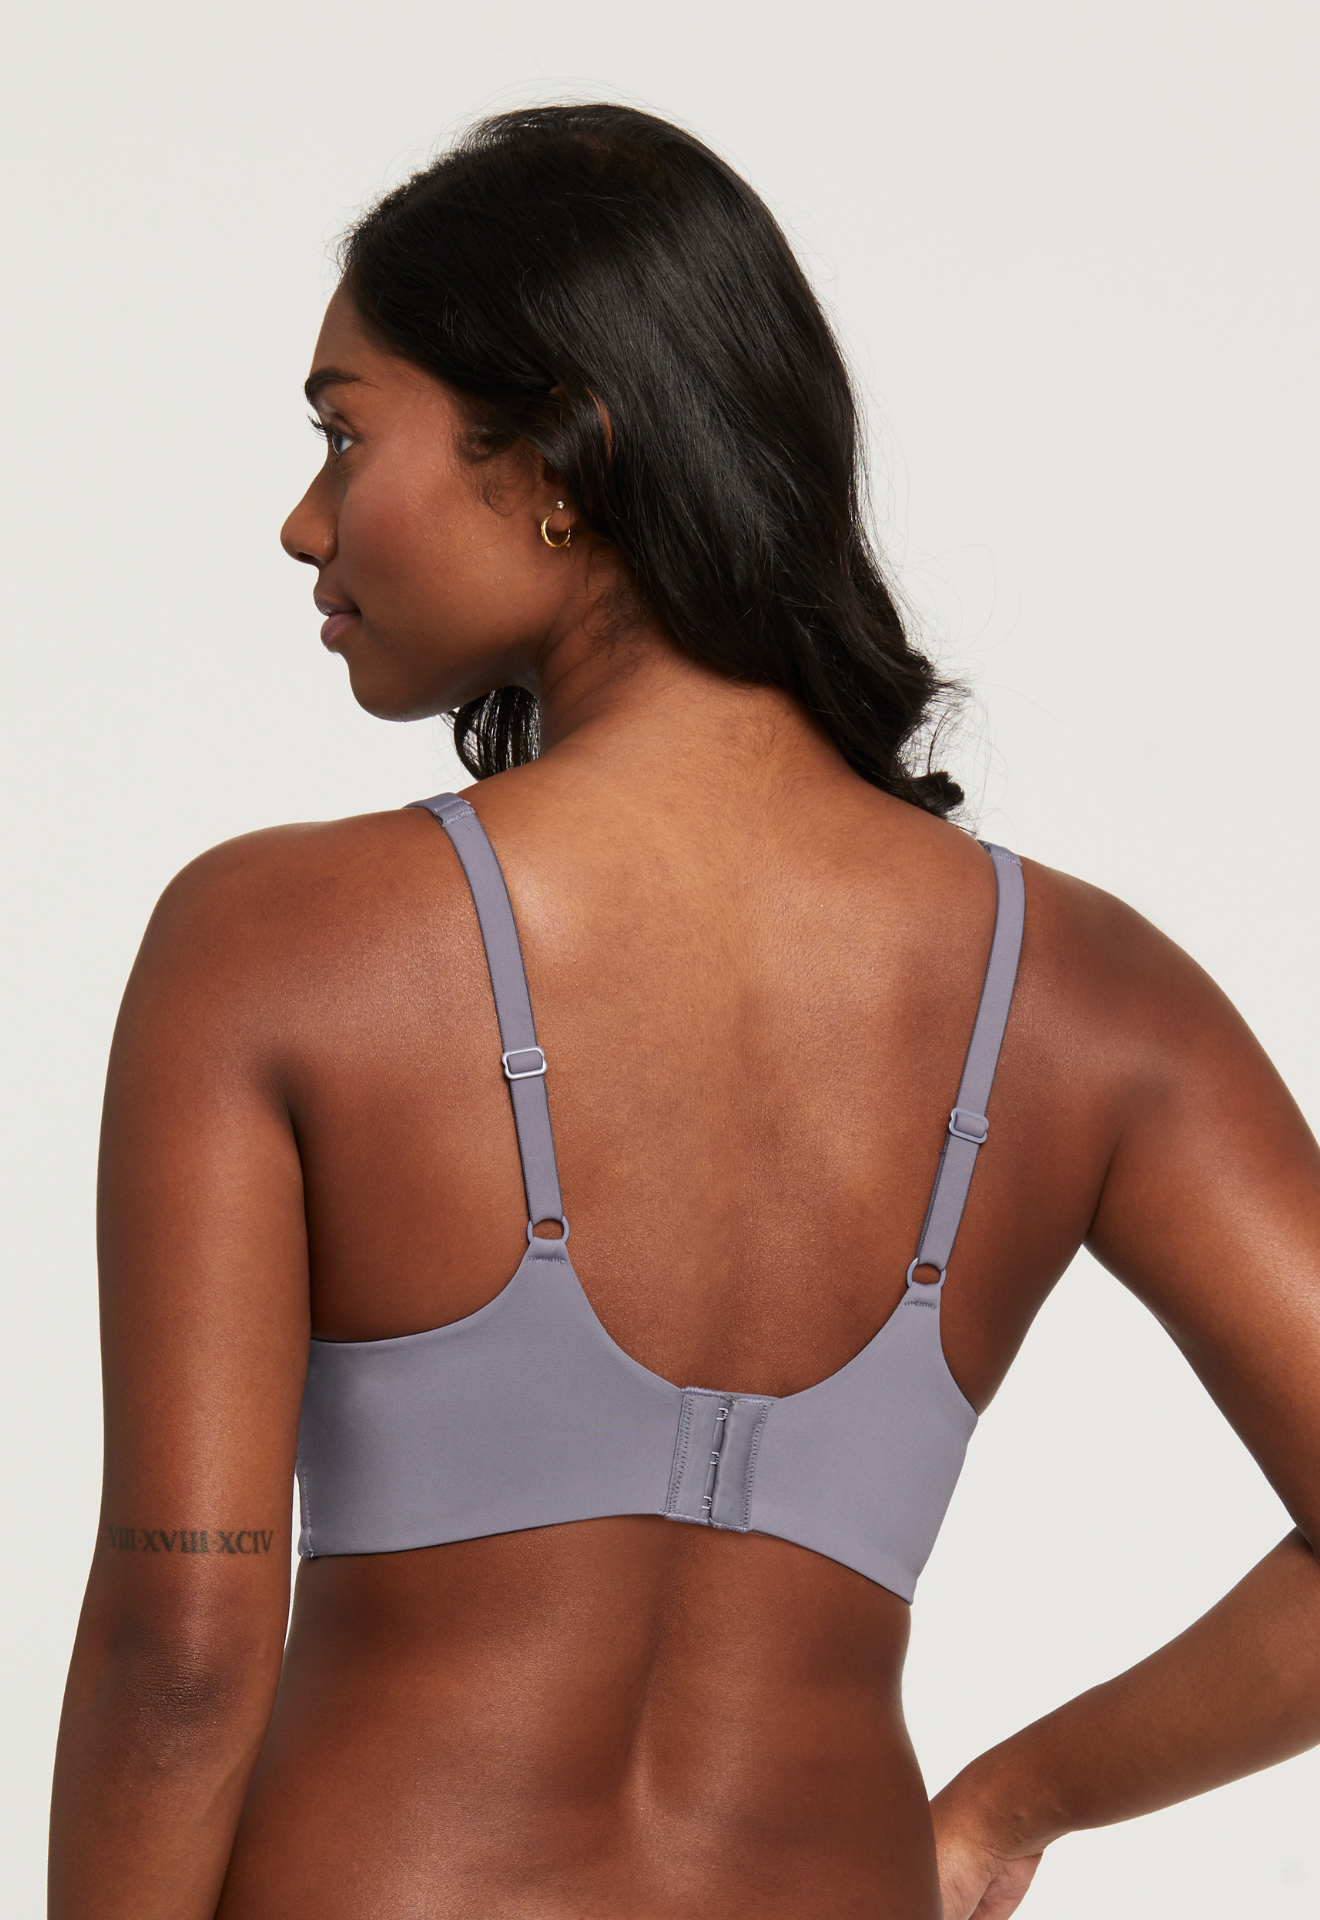 Mysa Cup-Sized Bralette - Crystal Grey worn by model back view